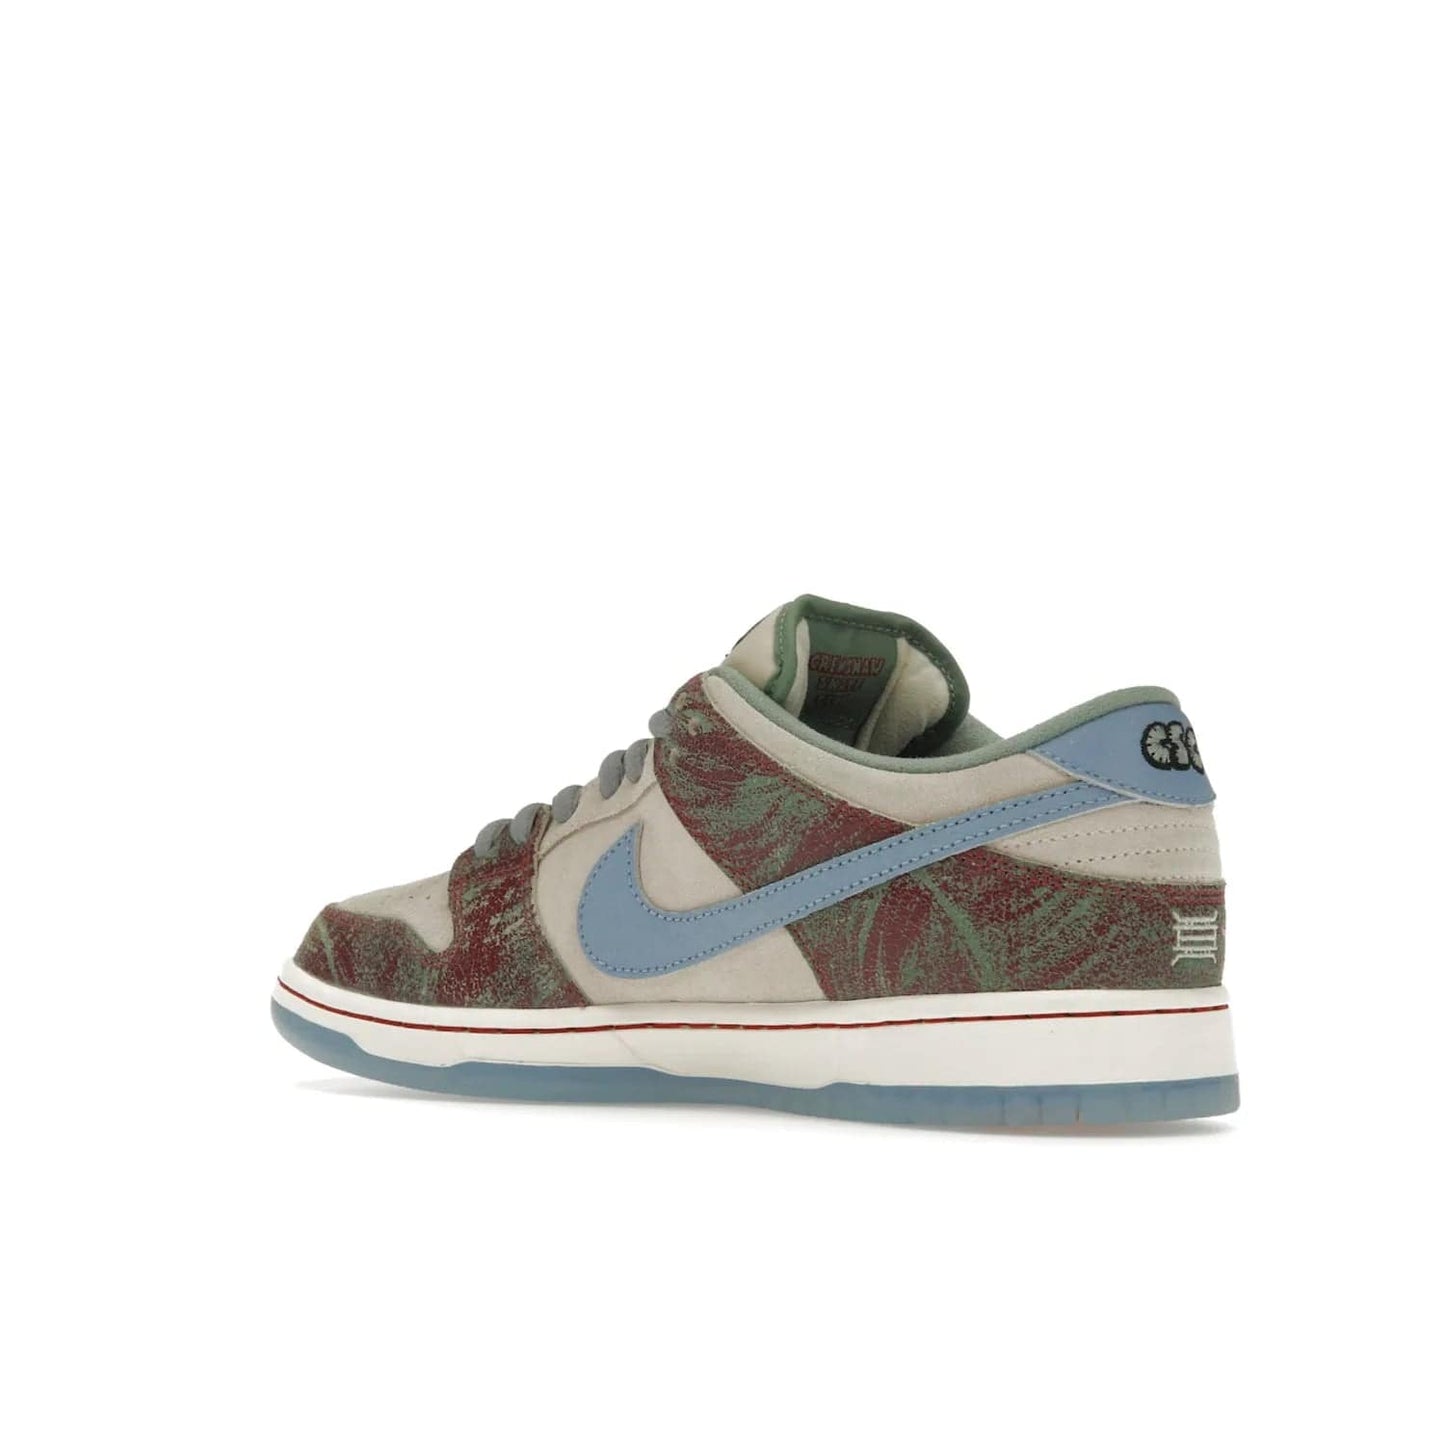 Nike SB Dunk Low Crenshaw Skate Club - Image 23 - Only at www.BallersClubKickz.com - Introducing the Nike SB Dunk Low Crenshaw Skate Club! Classic skate shoes with Sail and Light Blue upper, Cedar accents, padded collars and superior grip for comfortable, stable performance and style. Ideal for any skate session.